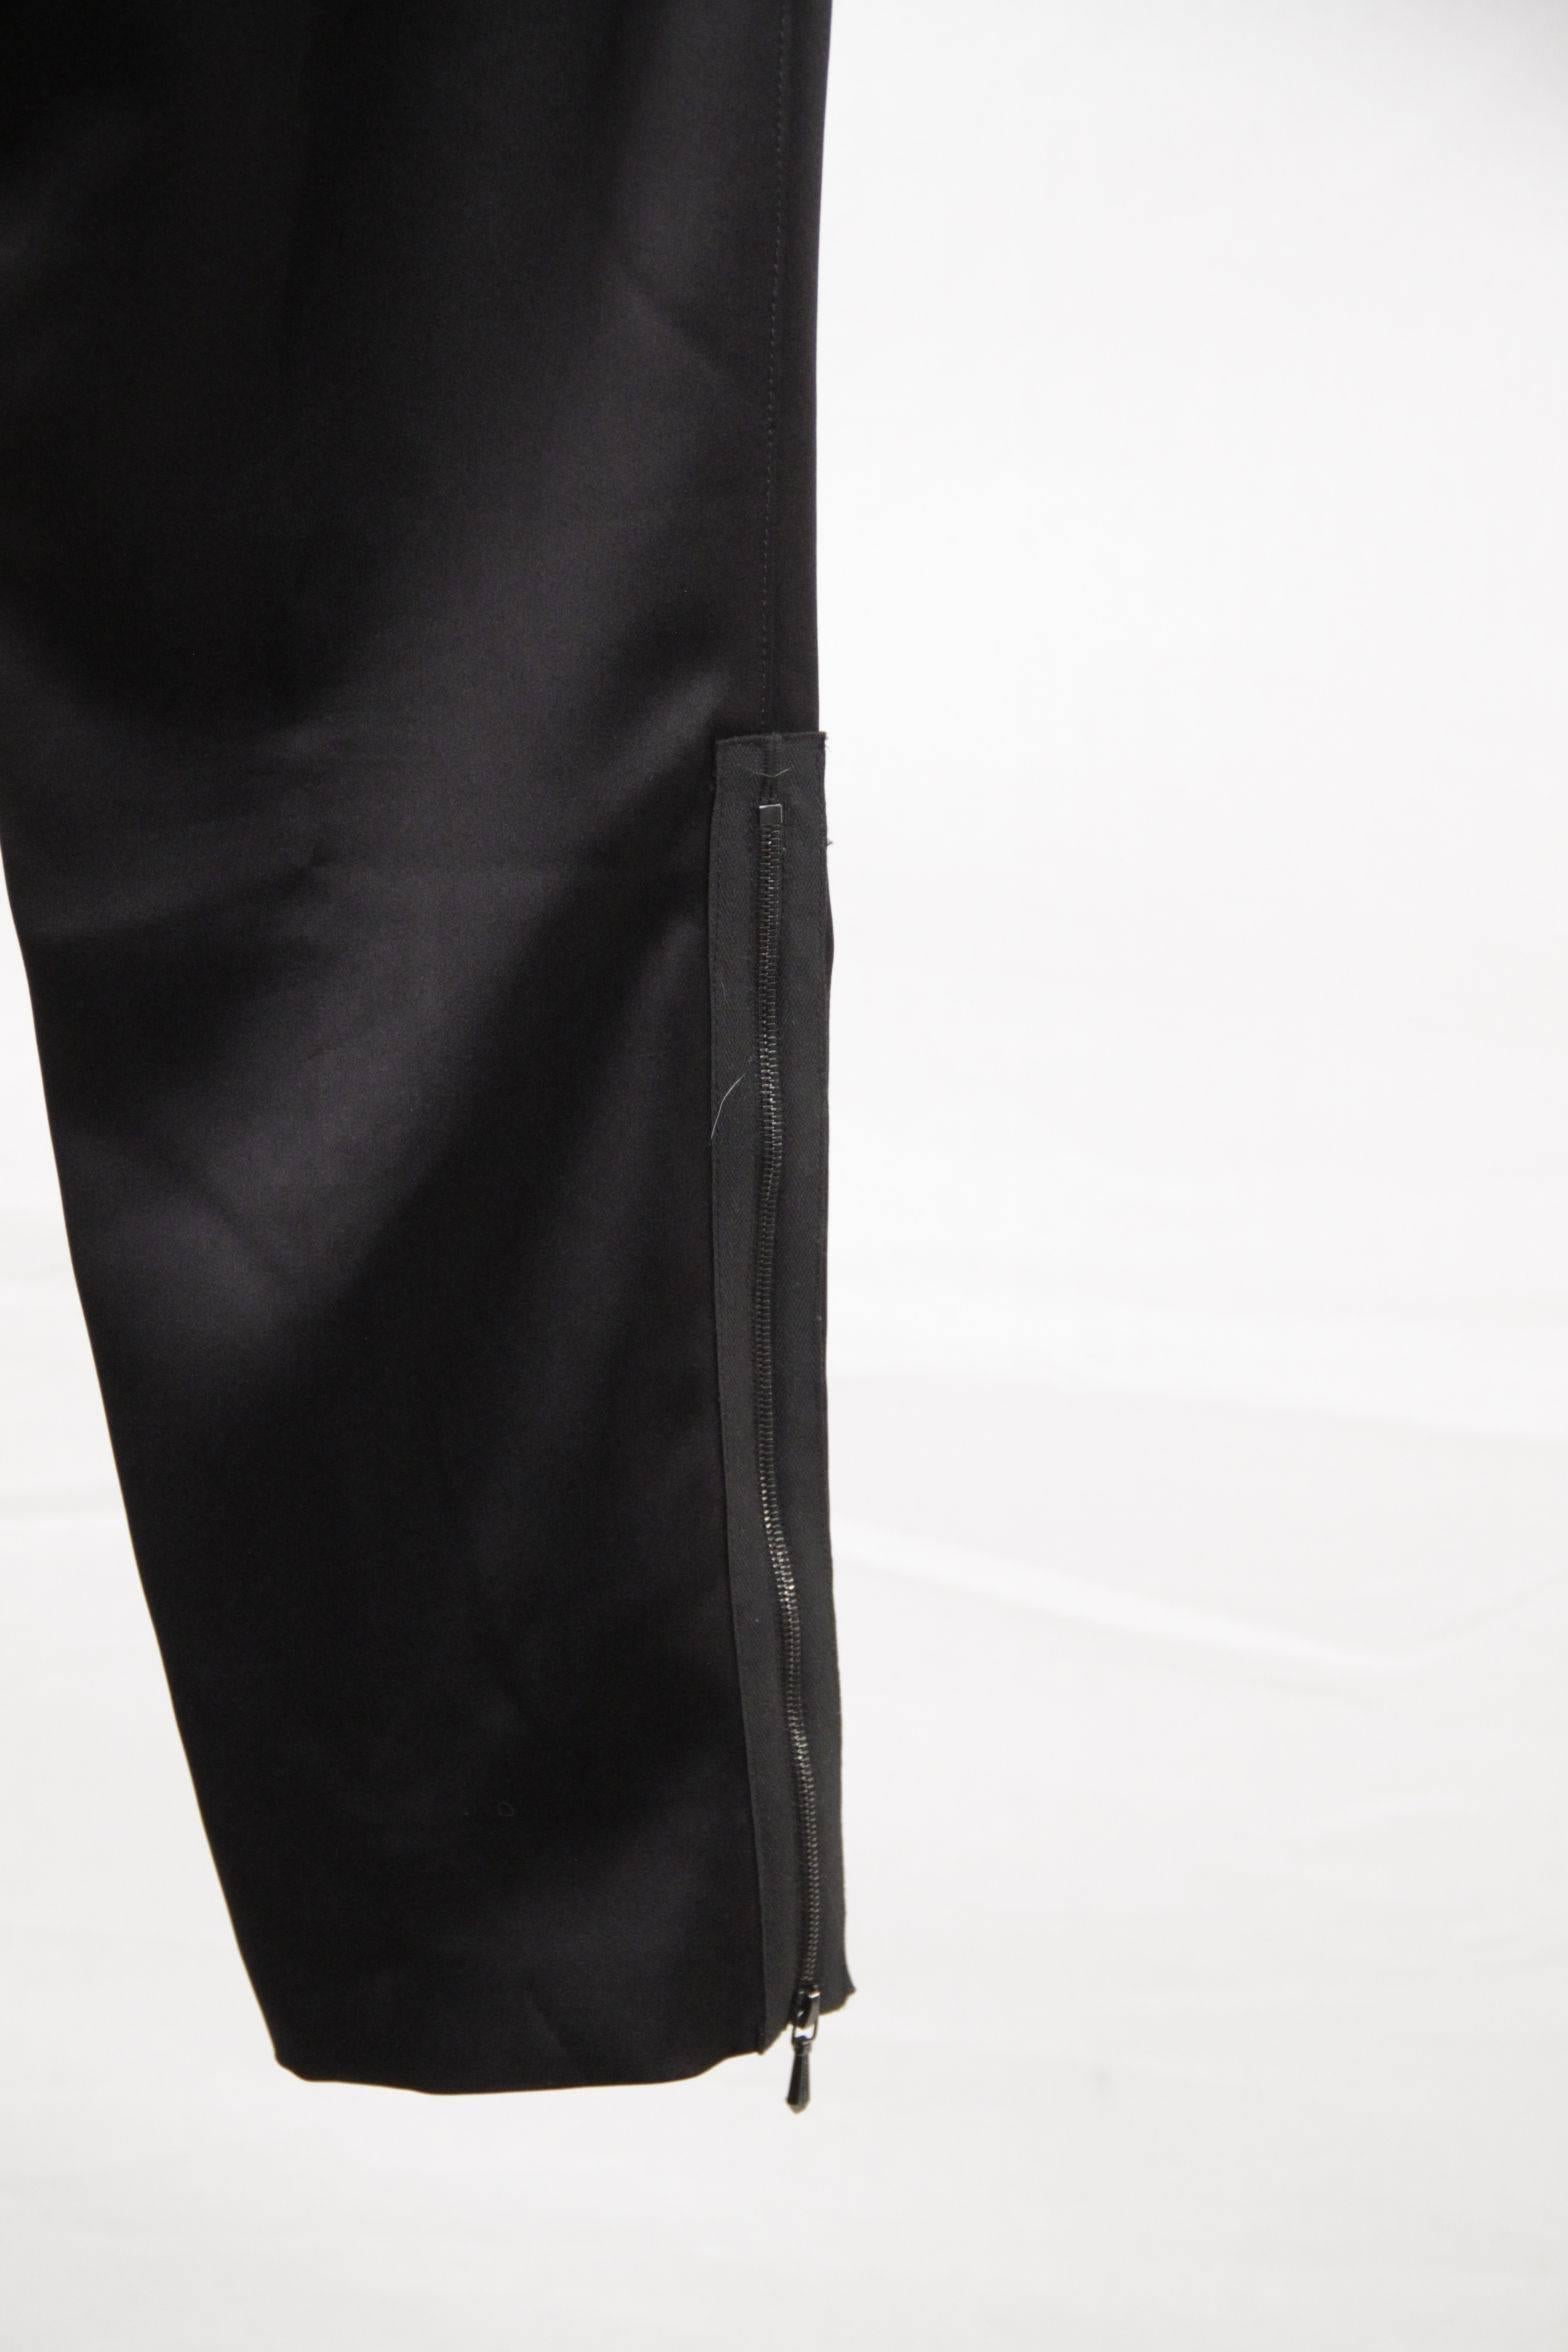 CHANEL Black Pure Silk PANTS Trousers w/ ZIP Detail SIZE 36 In Good Condition In Rome, Rome